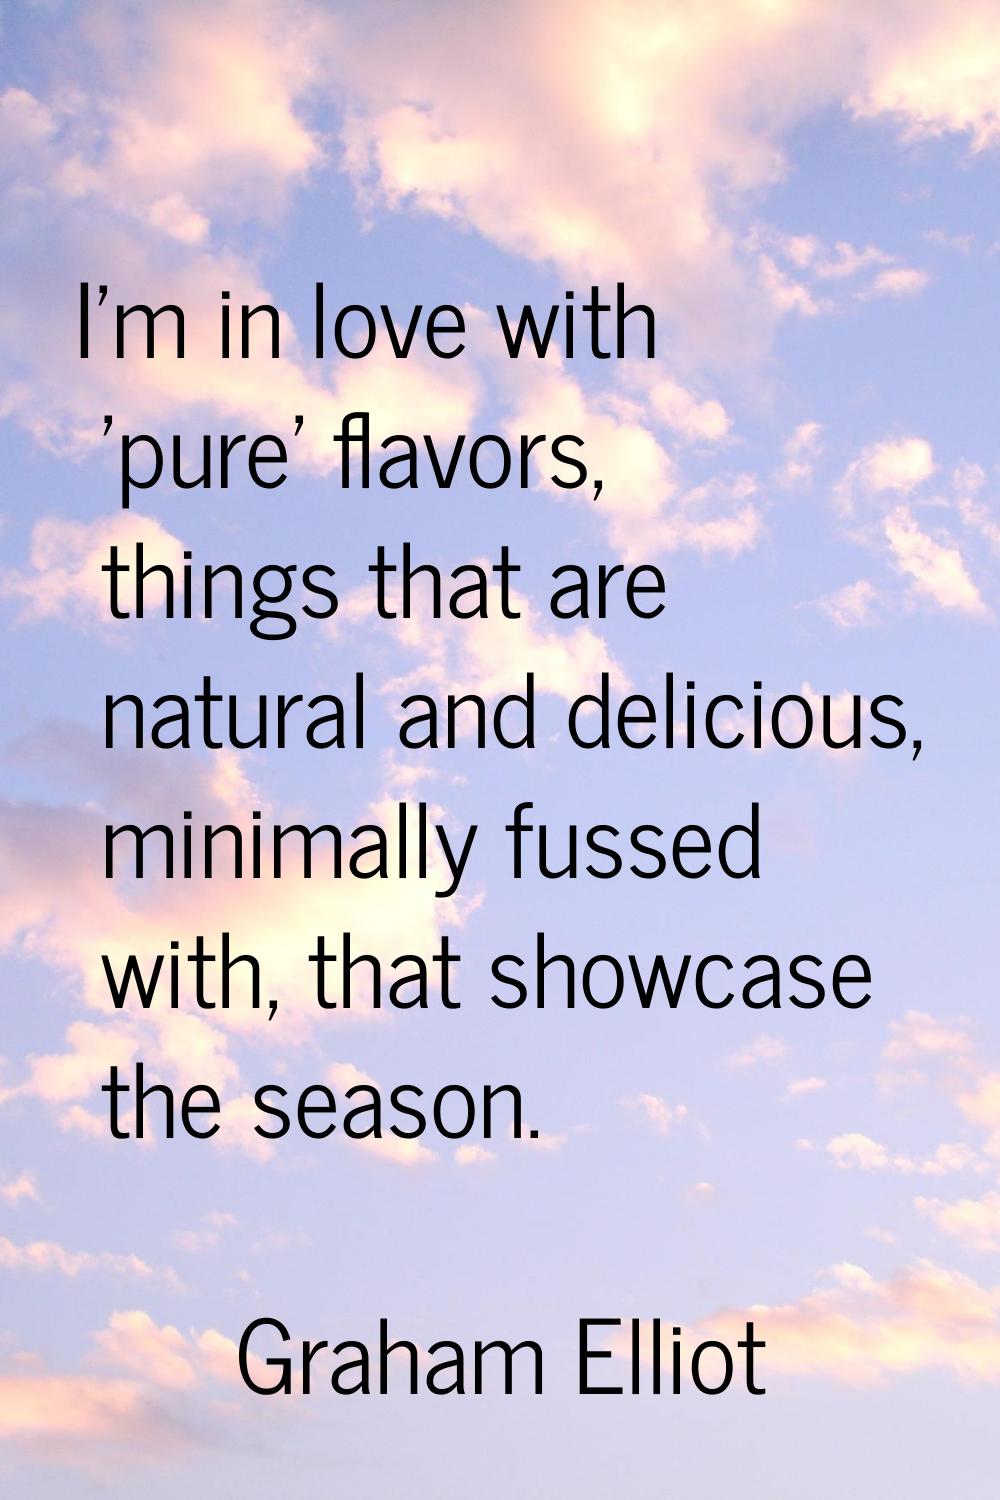 I'm in love with 'pure' flavors, things that are natural and delicious, minimally fussed with, that